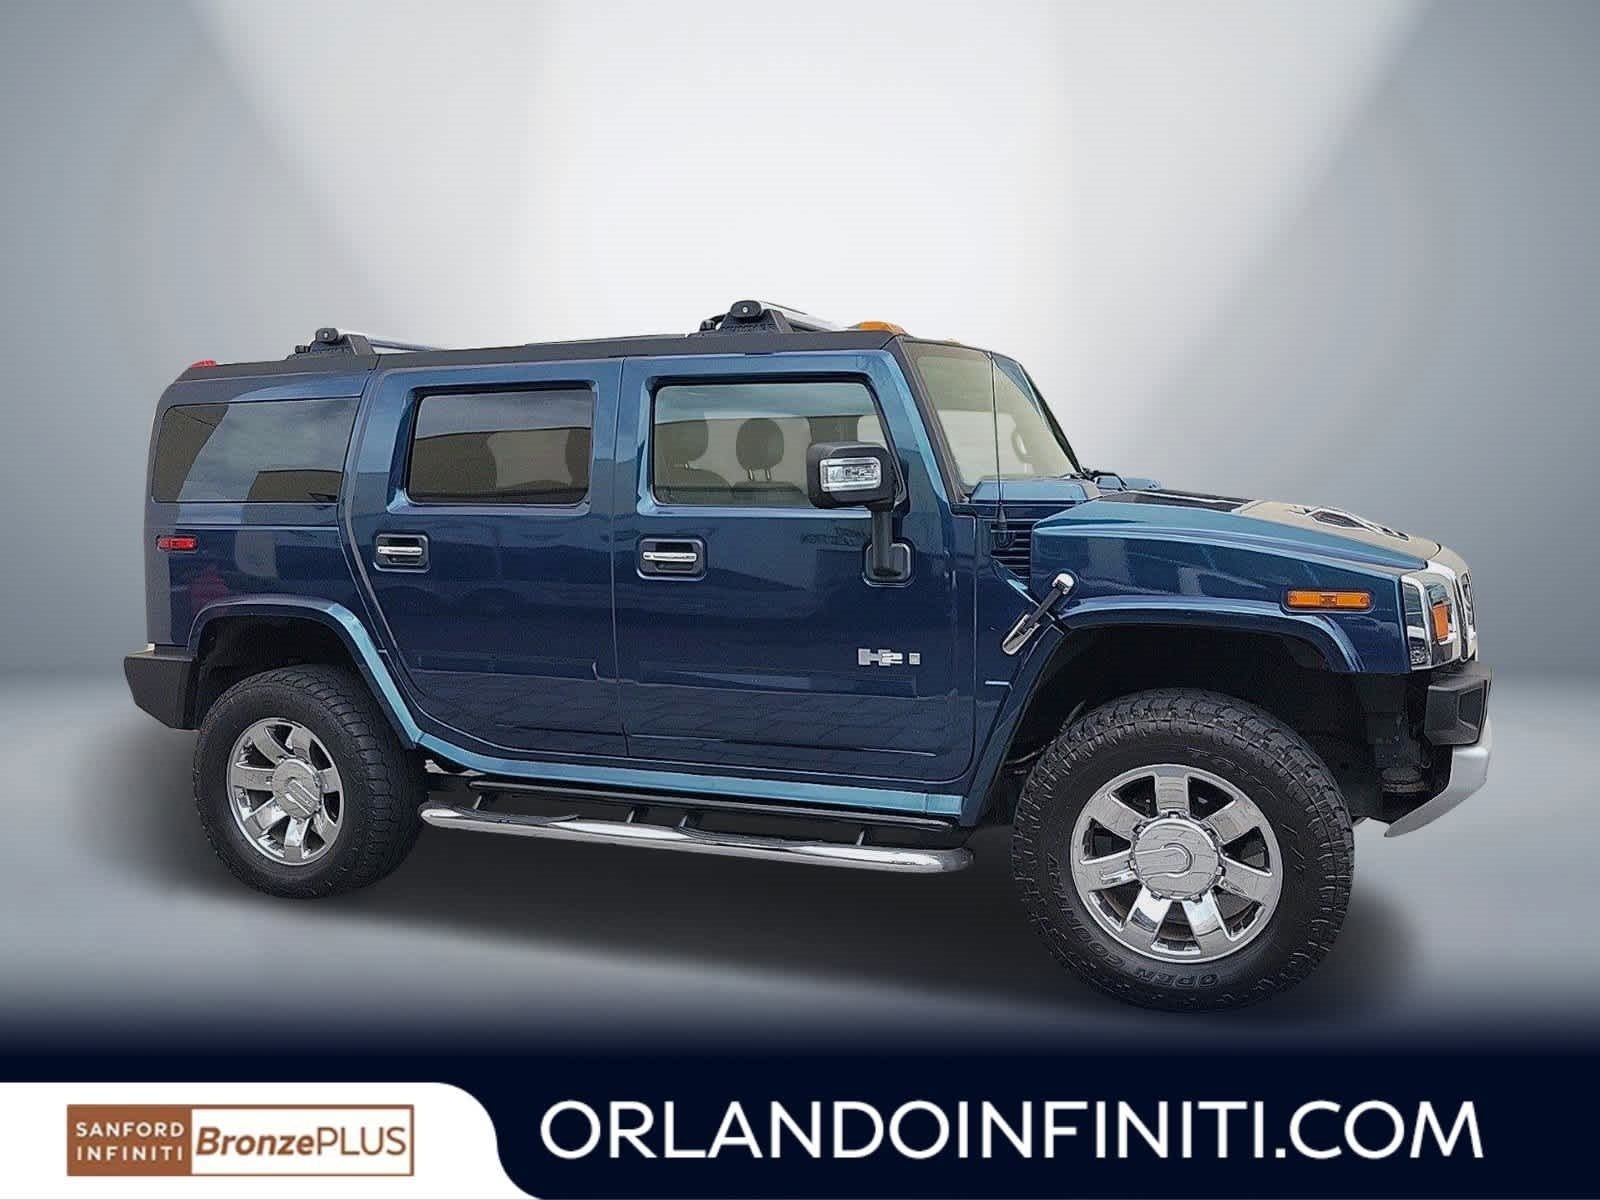 Used 2008 Hummer H2 SUV with VIN 5GRGN23848H107450 for sale in Orlando, FL